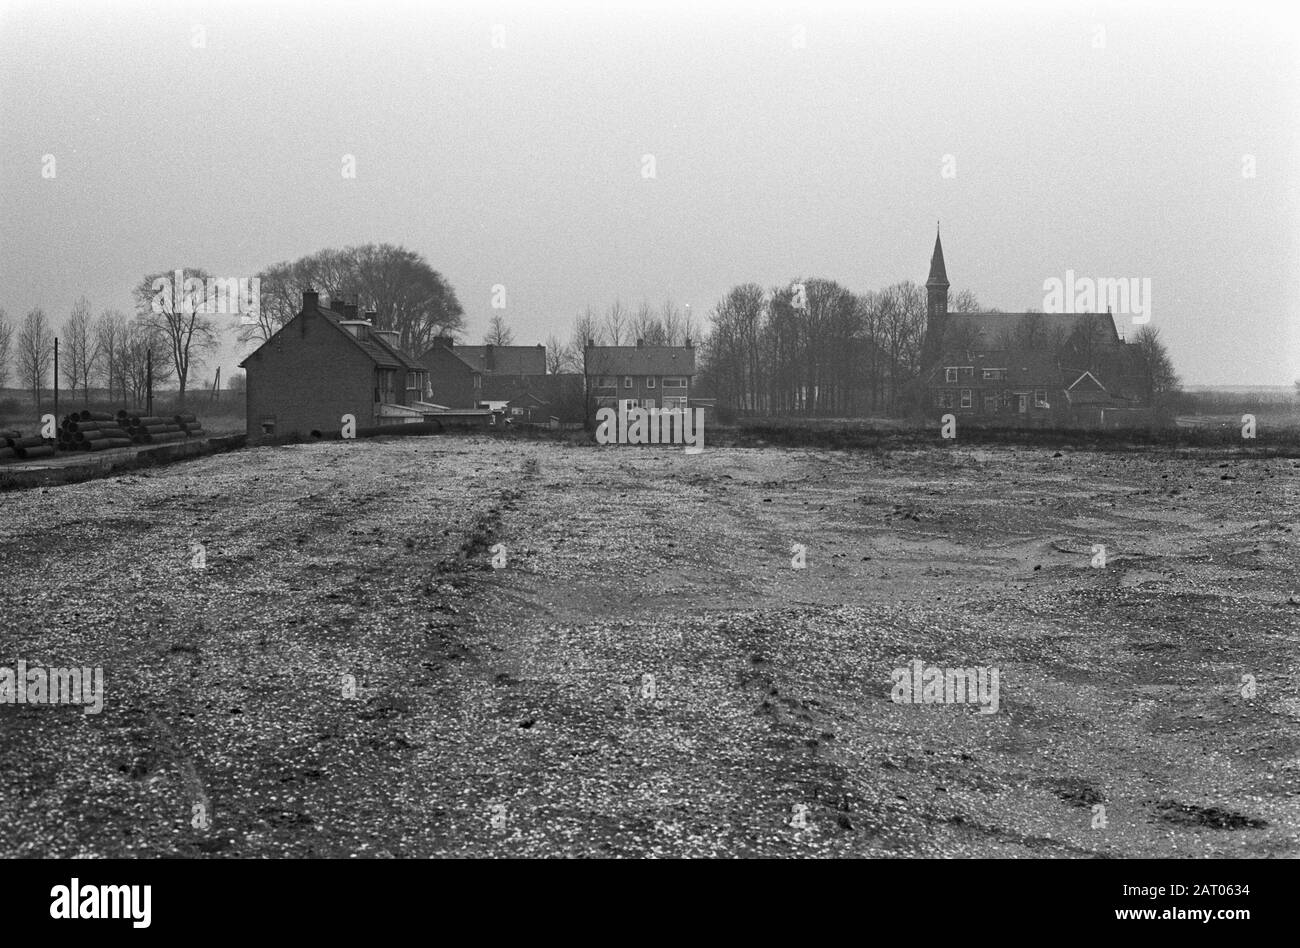 Dorp Ruigoord (near Halfweg in the IJ-polder) is going to disappear  villages Annotation: Recording is from earlier date than publication Date: 17 June 1973 Location: Halfweg, Ruigoord Keywords: villages Stock Photo